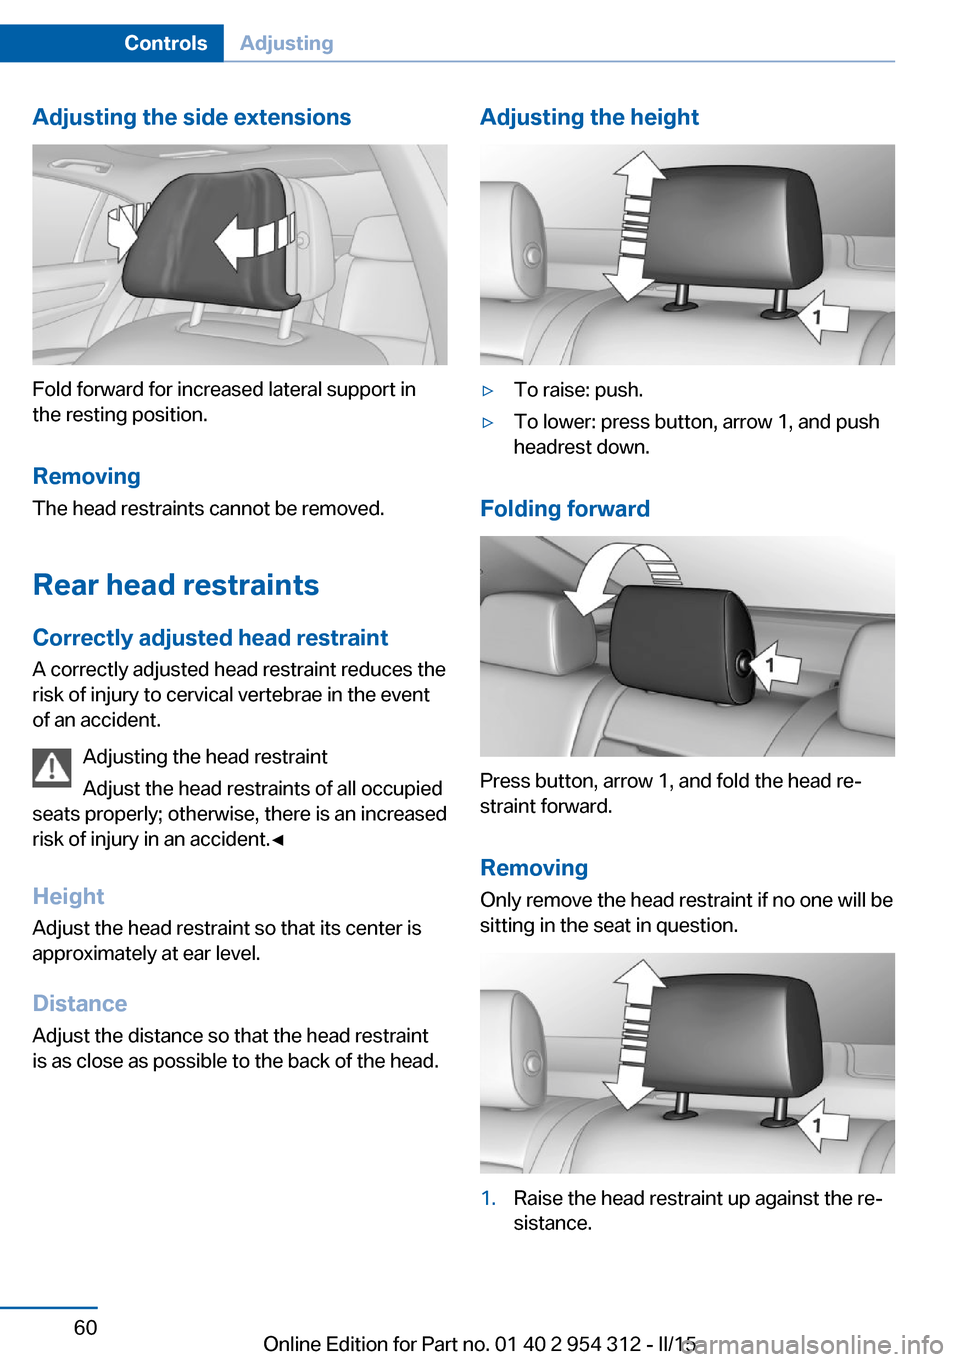 BMW 5 SERIES 2015 F10 Owners Manual Adjusting the side extensions
Fold forward for increased lateral support in
the resting position.
Removing The head restraints cannot be removed.
Rear head restraints
Correctly adjusted head restraint